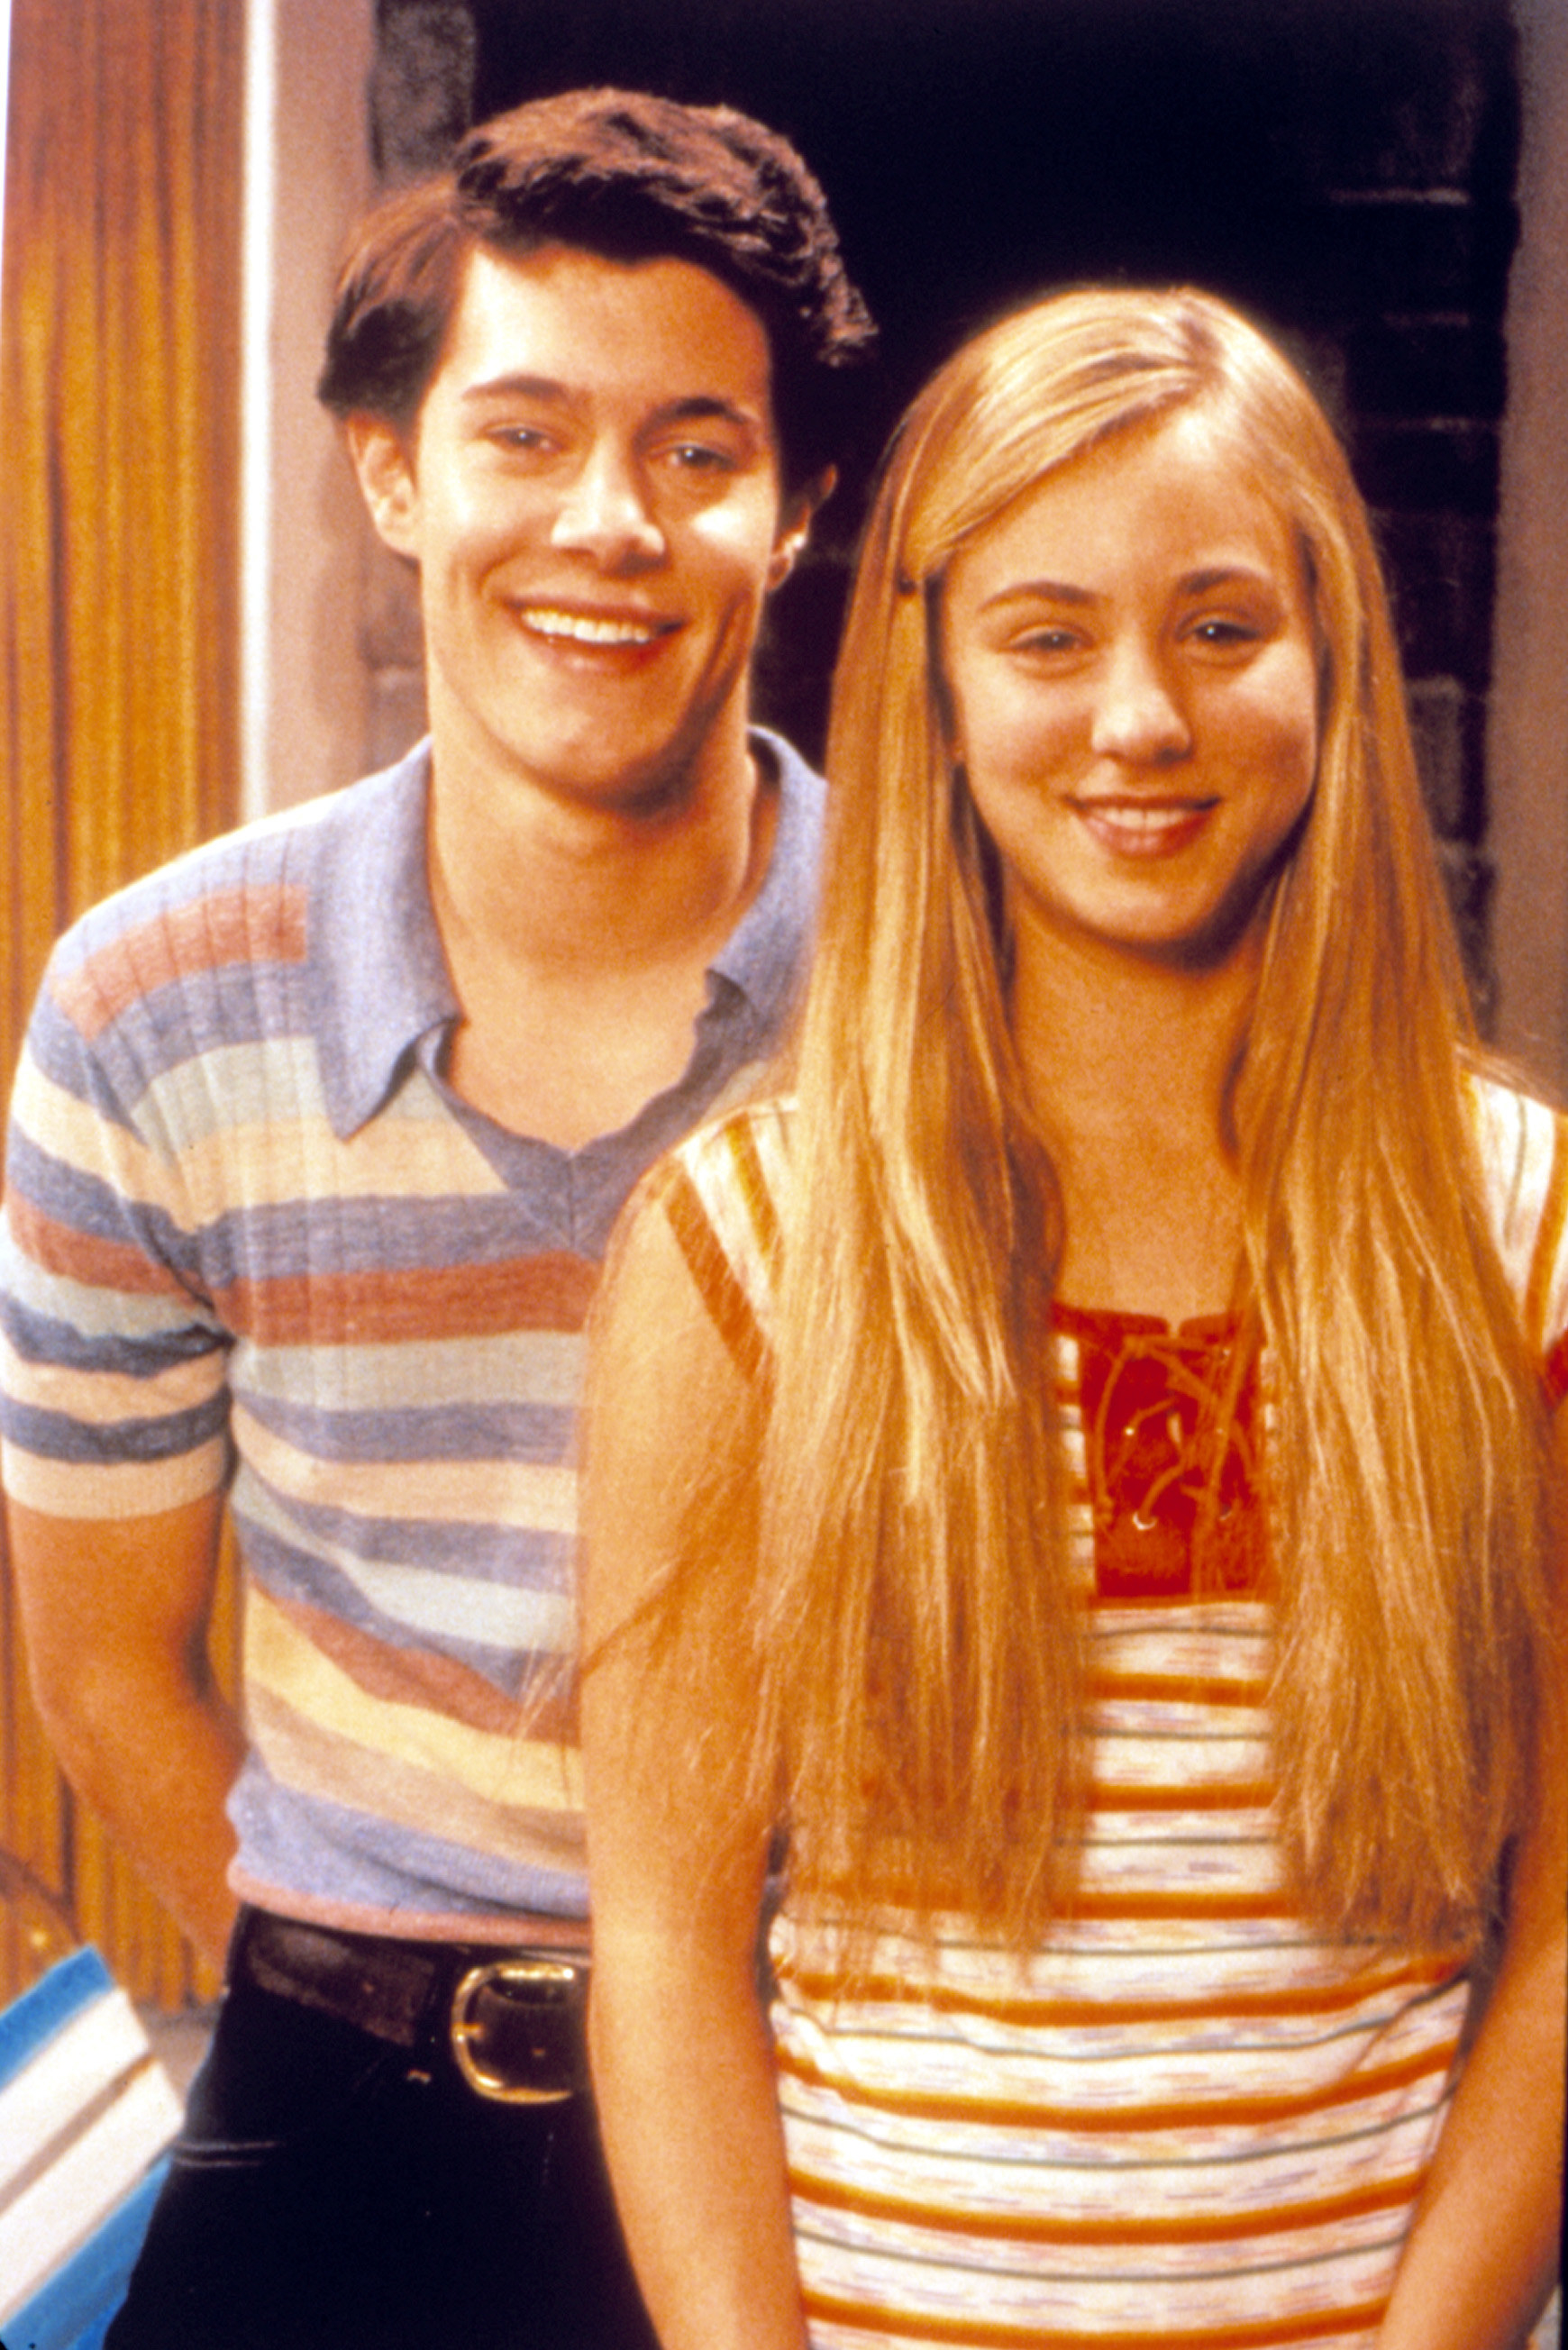 A photo of Adam Brody and Kaley Cuoco dressed up as Greg and Marcia Brady